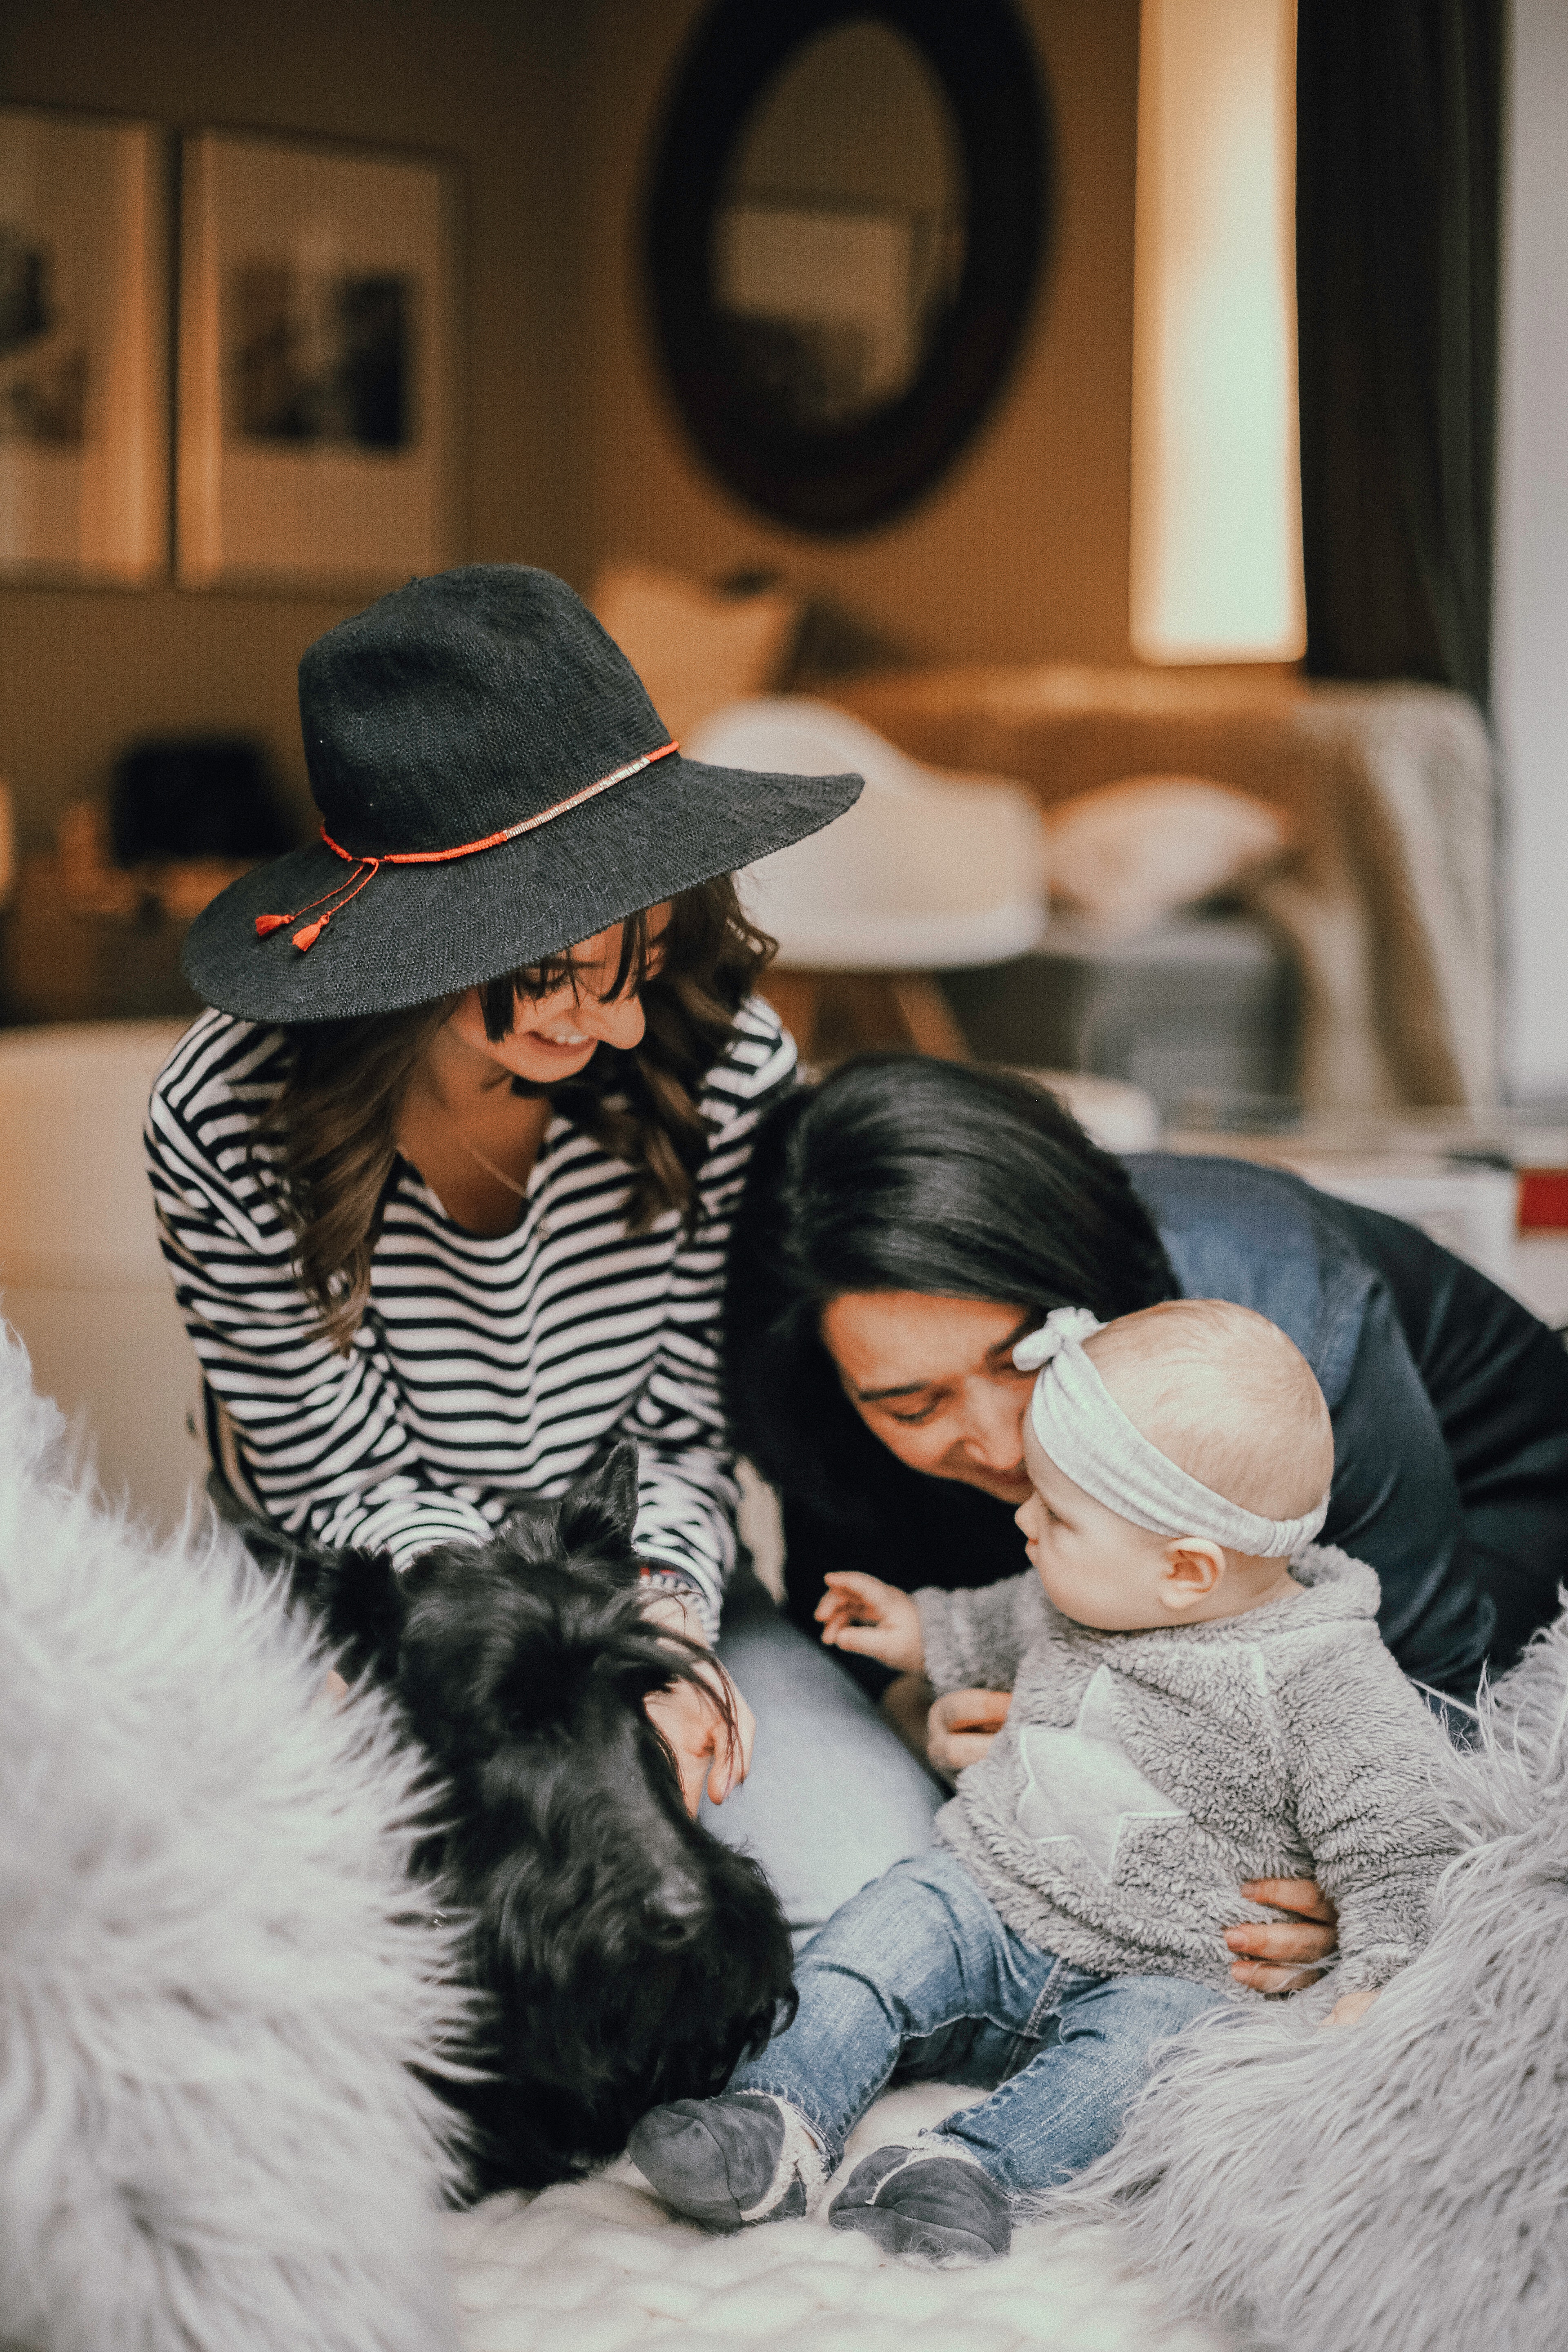 An image of a family of three, consisting of an adult, a baby, and a child, standing together and looking at each other with love and affection. The focus of the image is on their connection, representing the importance of family relationships. The image promotes the idea of seeking family therapy in Connecticut, where families can work together to improve communication and overcome challenges. The image evokes a sense of warmth and the idea that with support and guidance, families can build stronger and happier relationships.